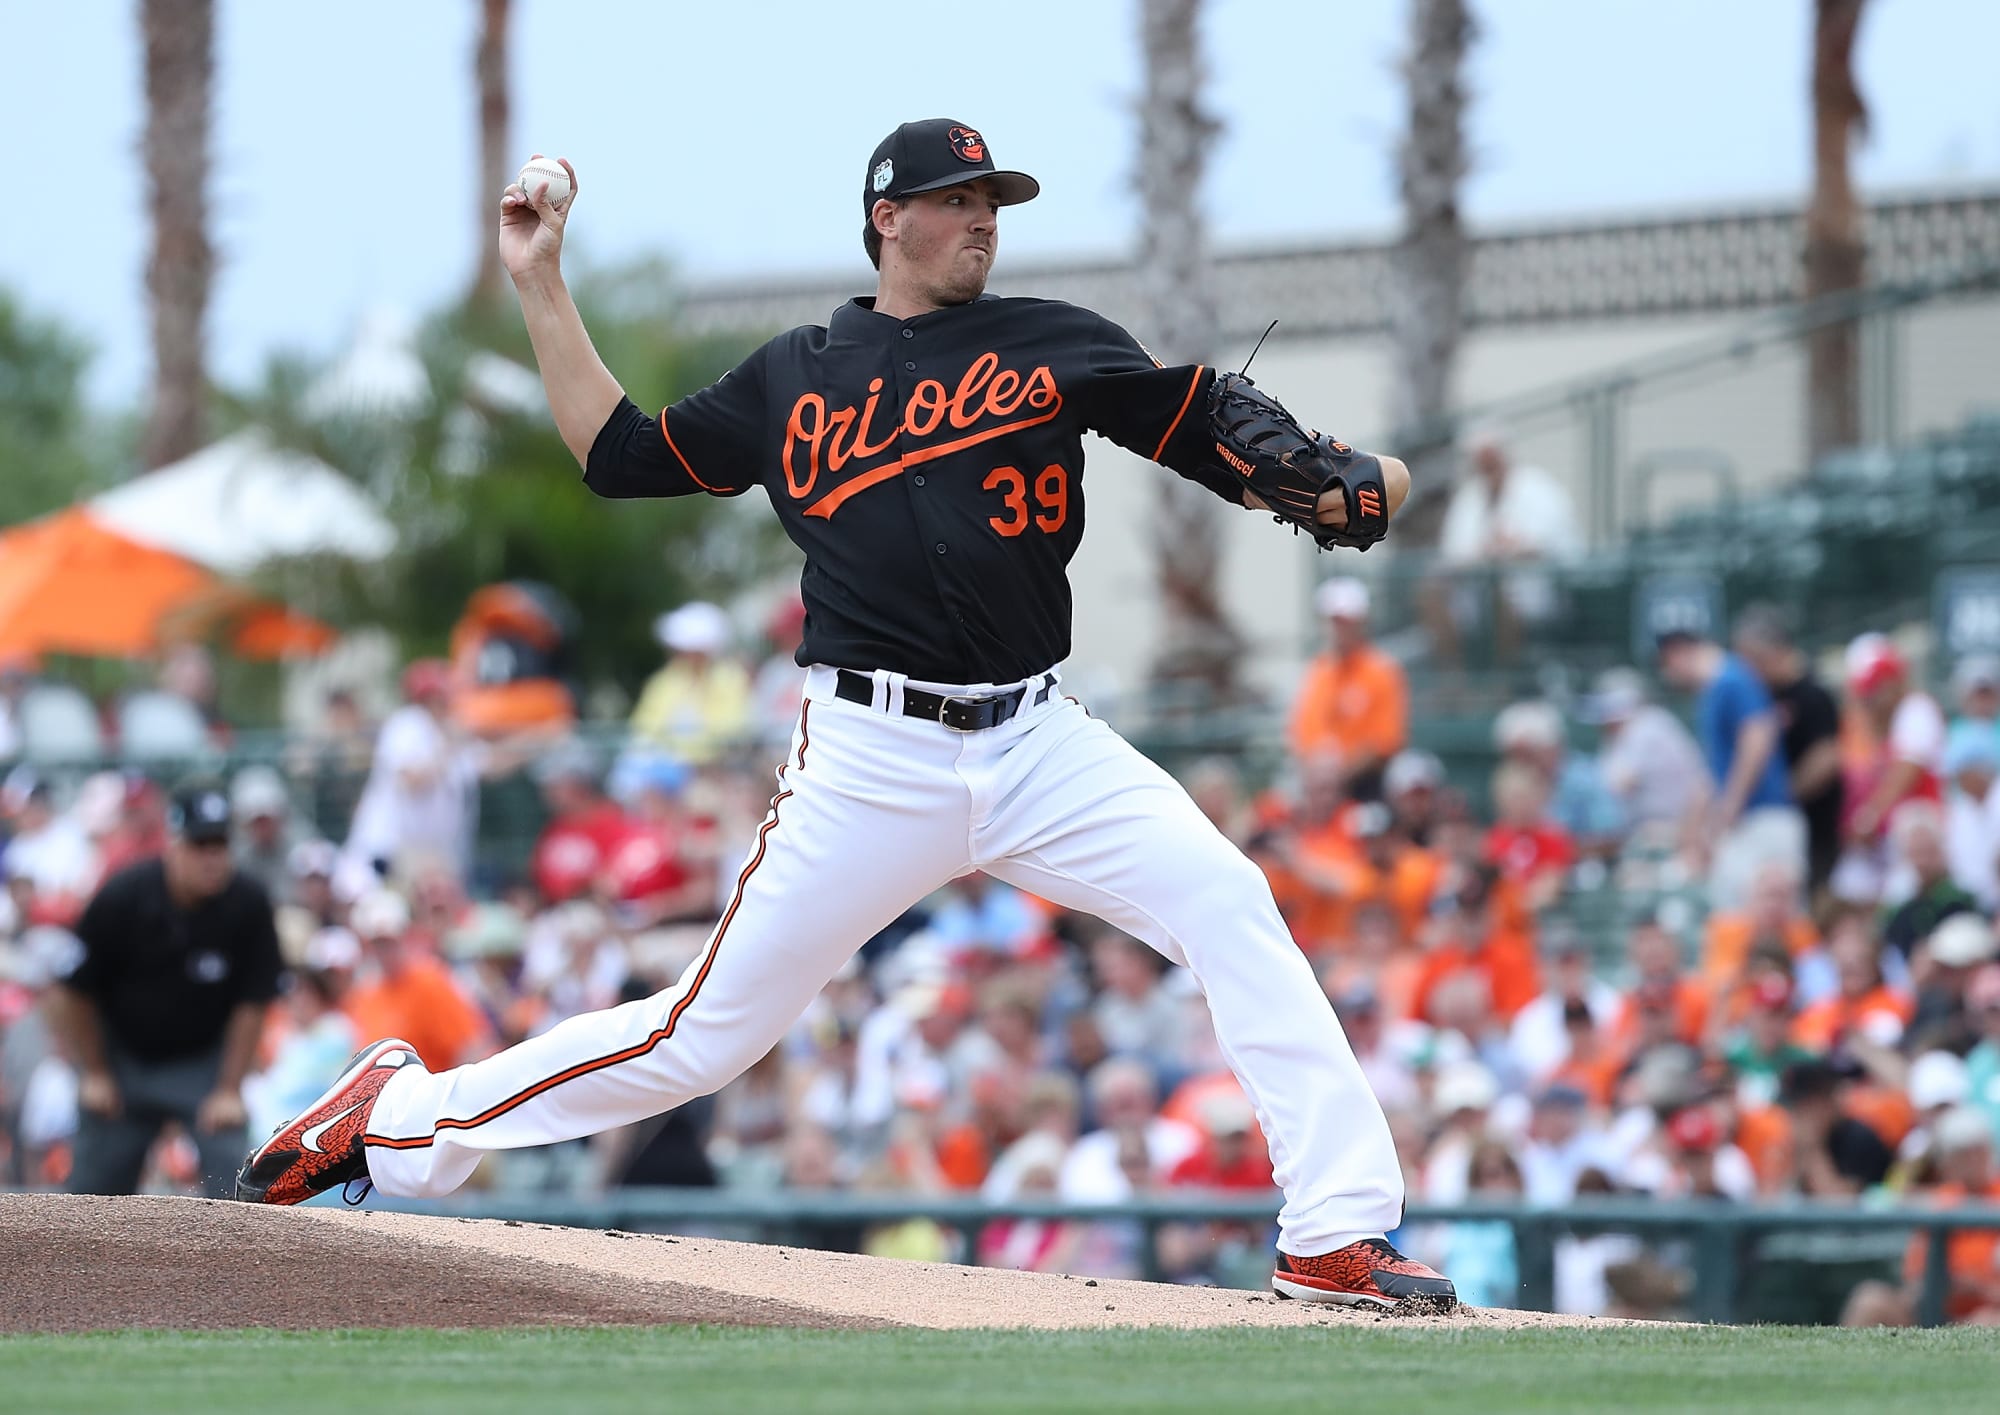 Baltimore Orioles Spring Training caps and schedule released